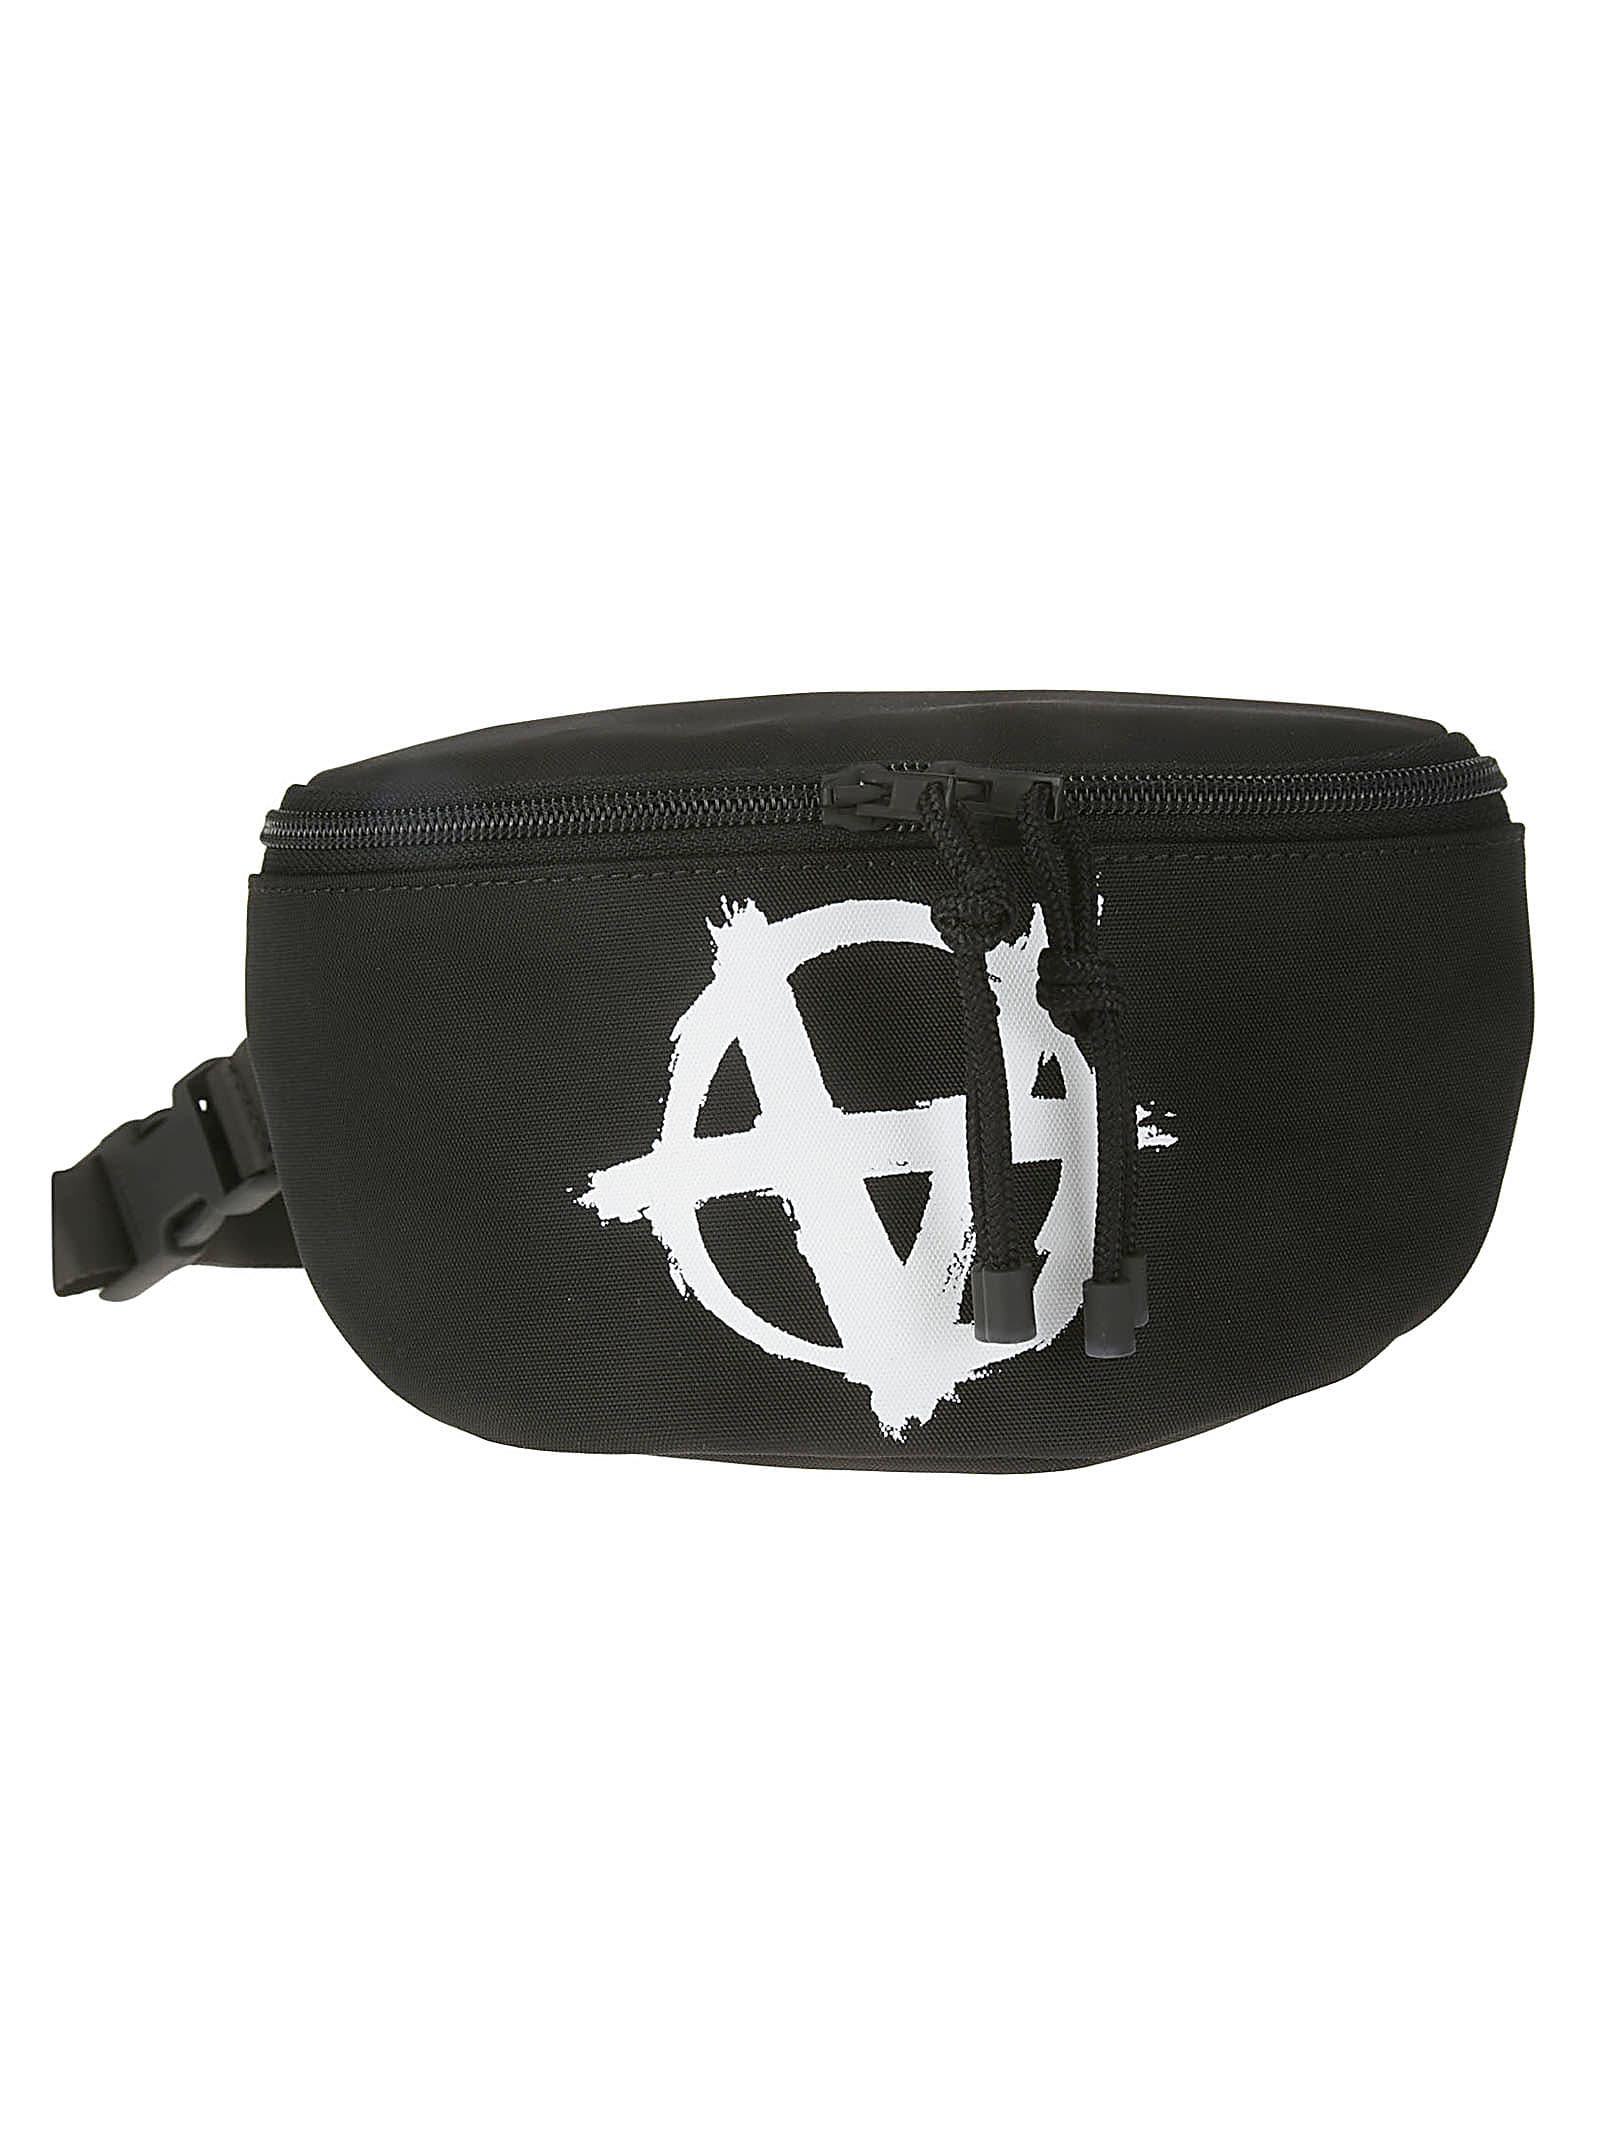 Anarchy Fanny Pack